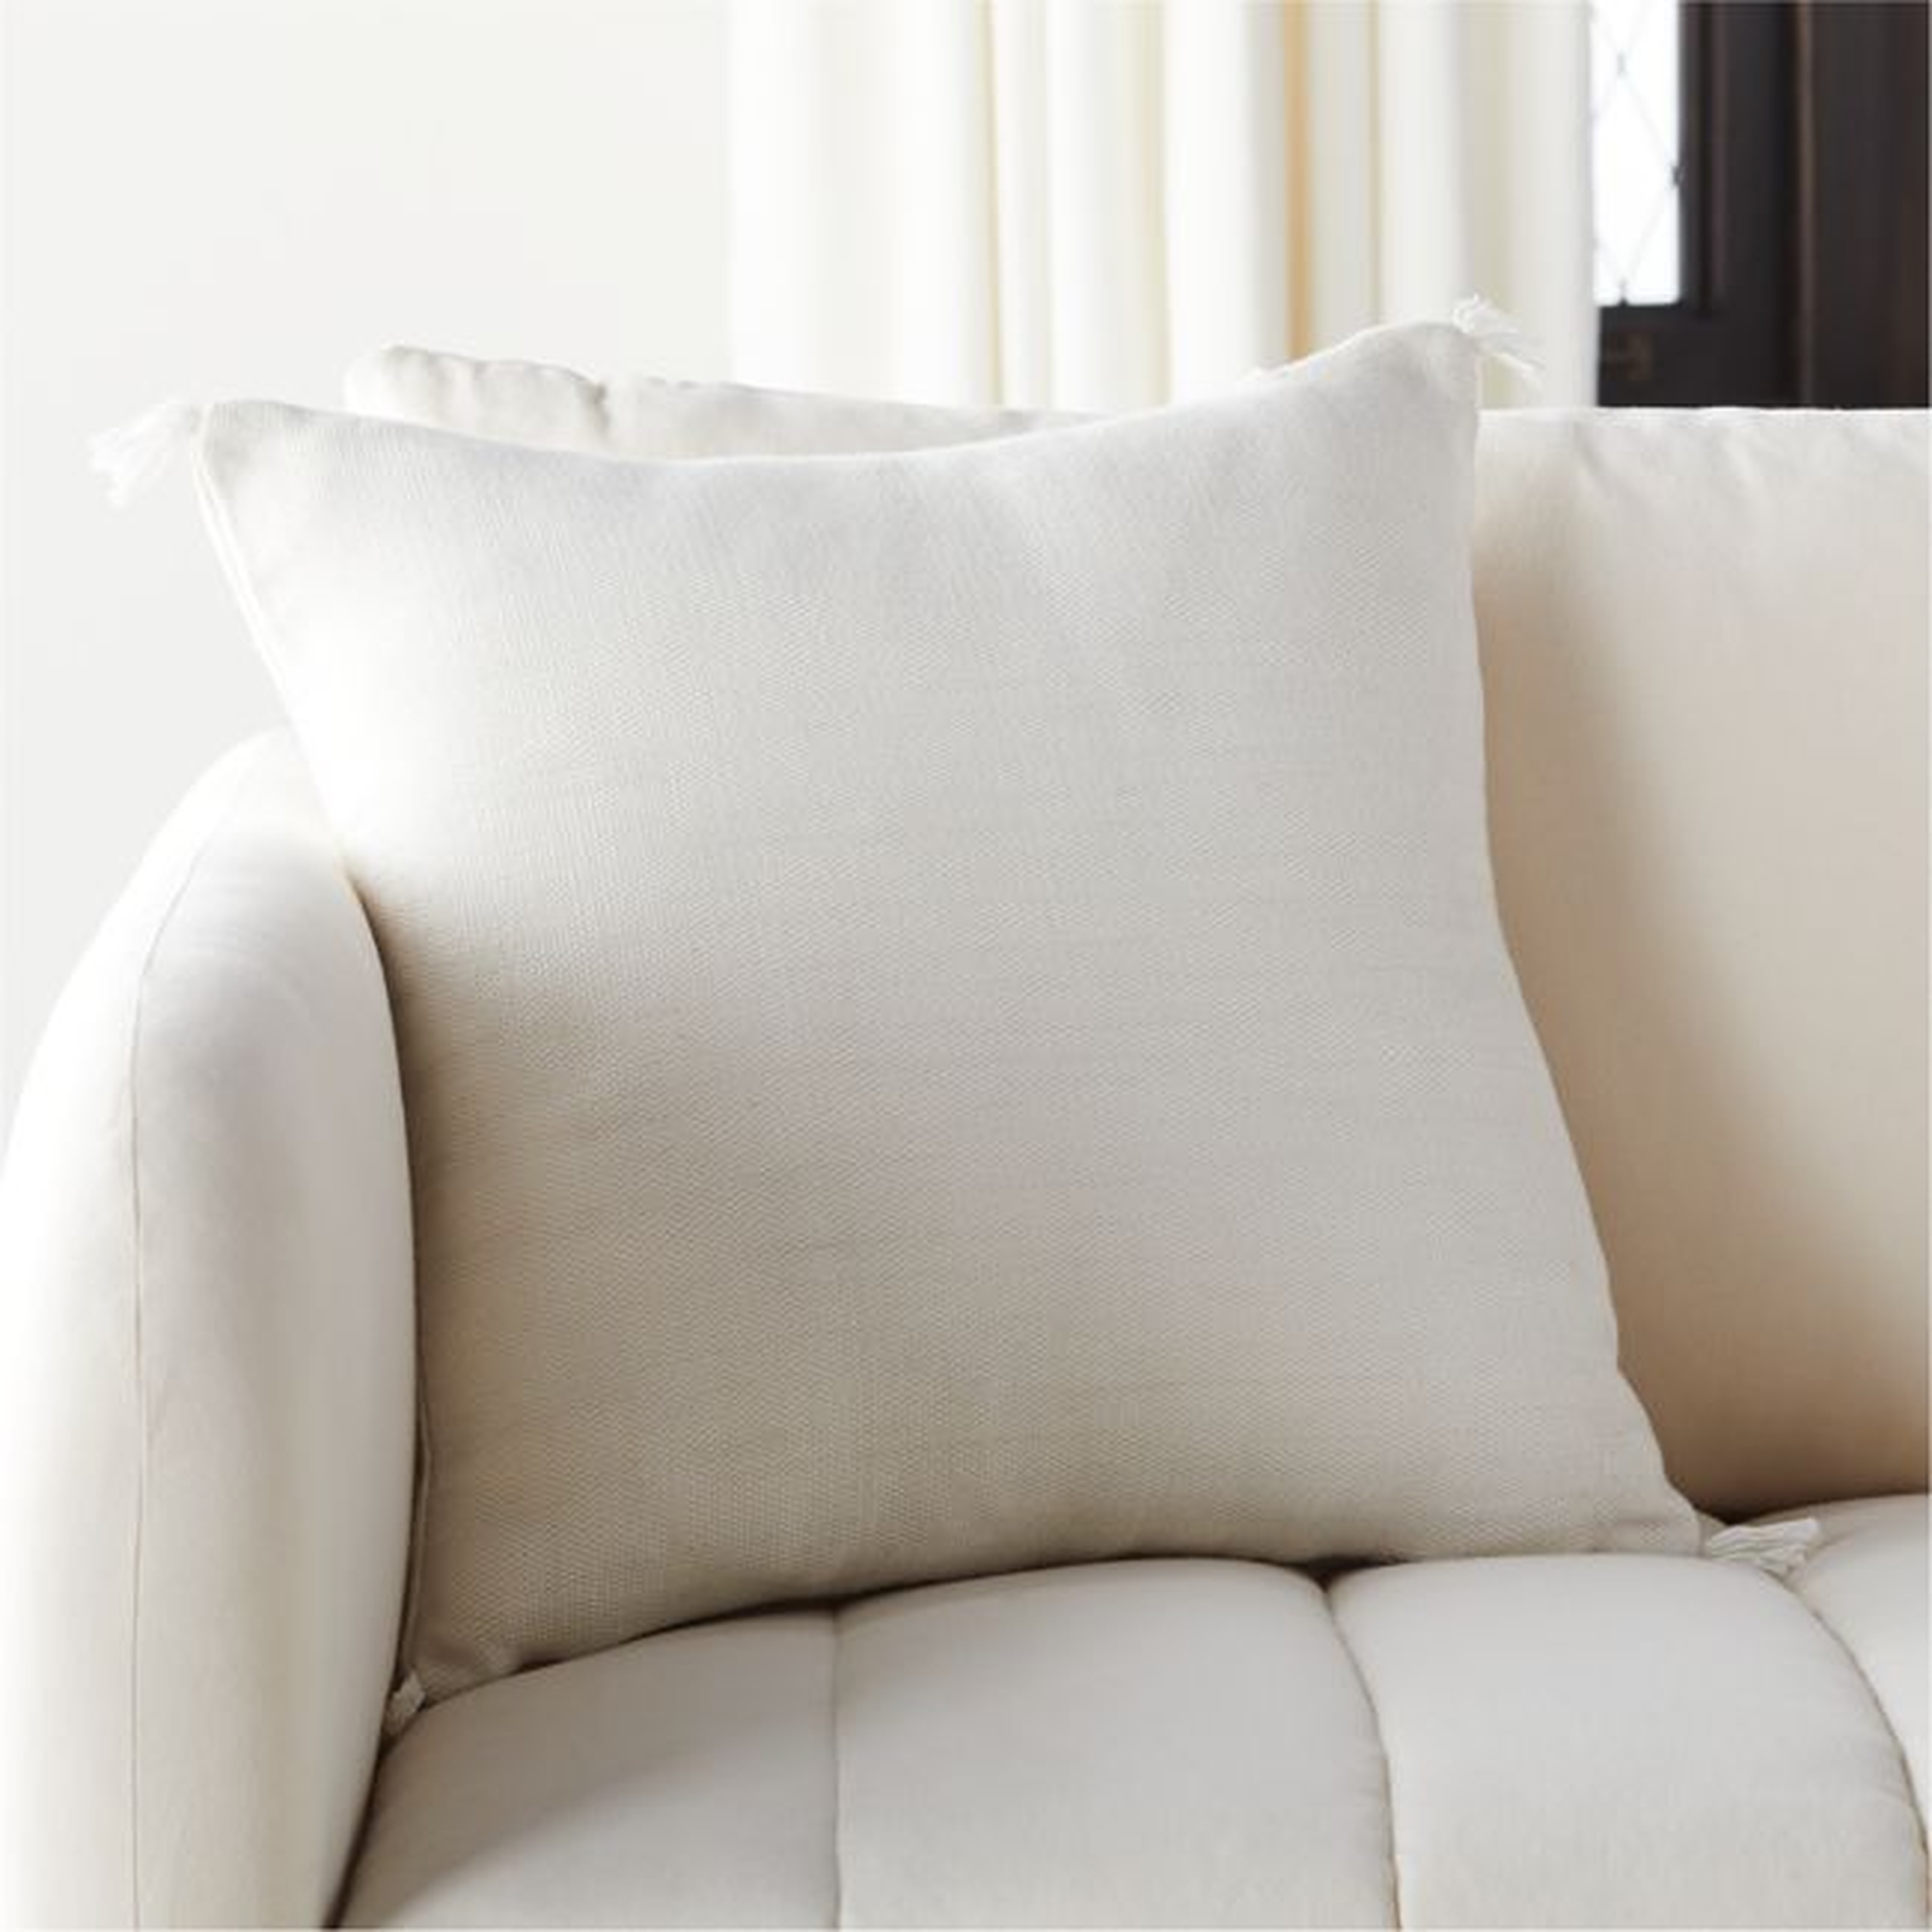 18" Plait Ivory Pillow with Feather-Down Insert - CB2